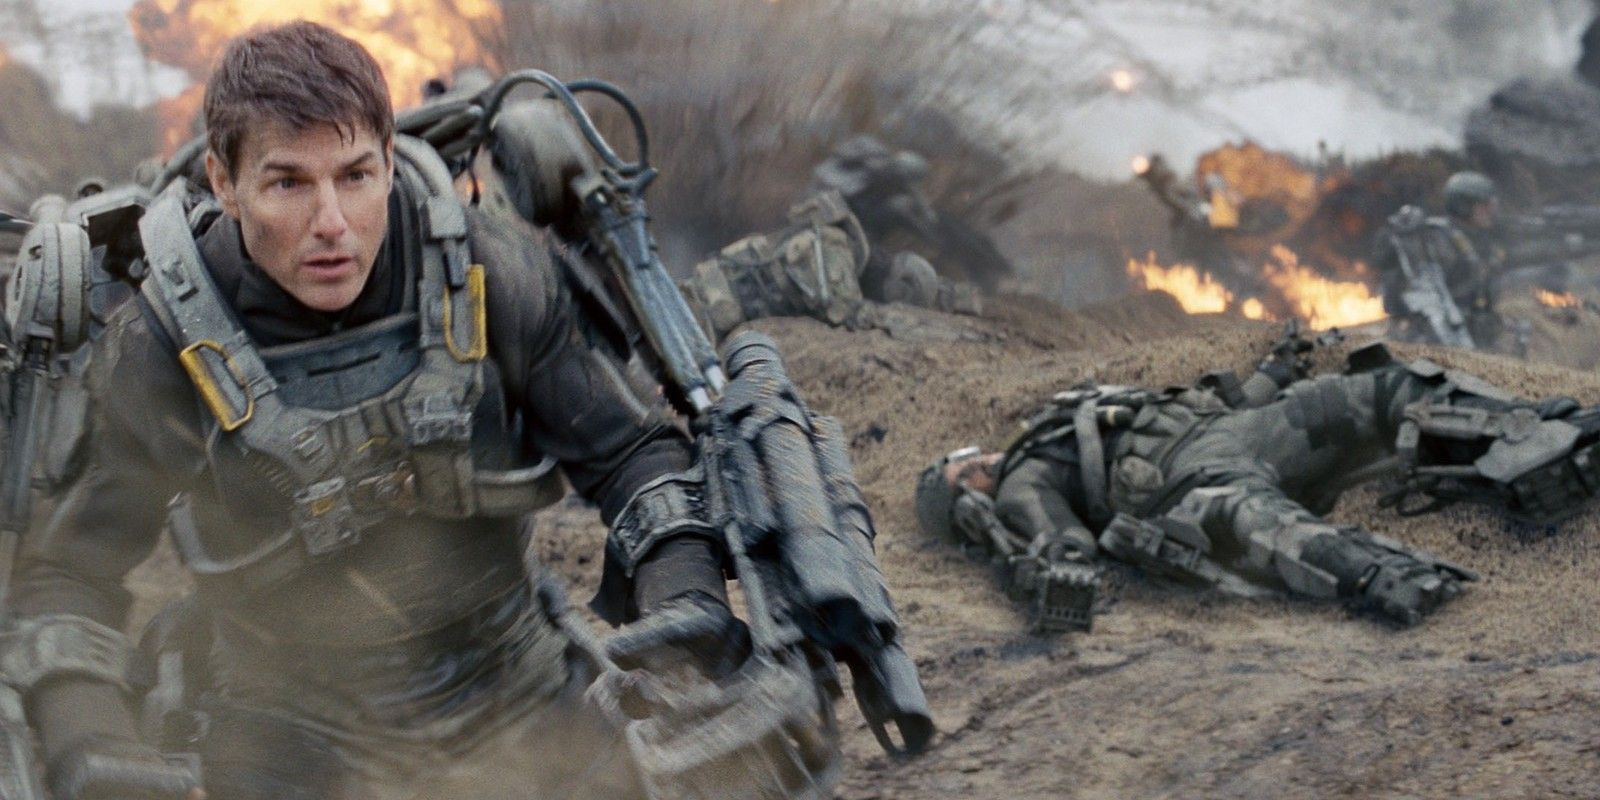 Tom Cruise on the battlefield in Edge of Tomorrow